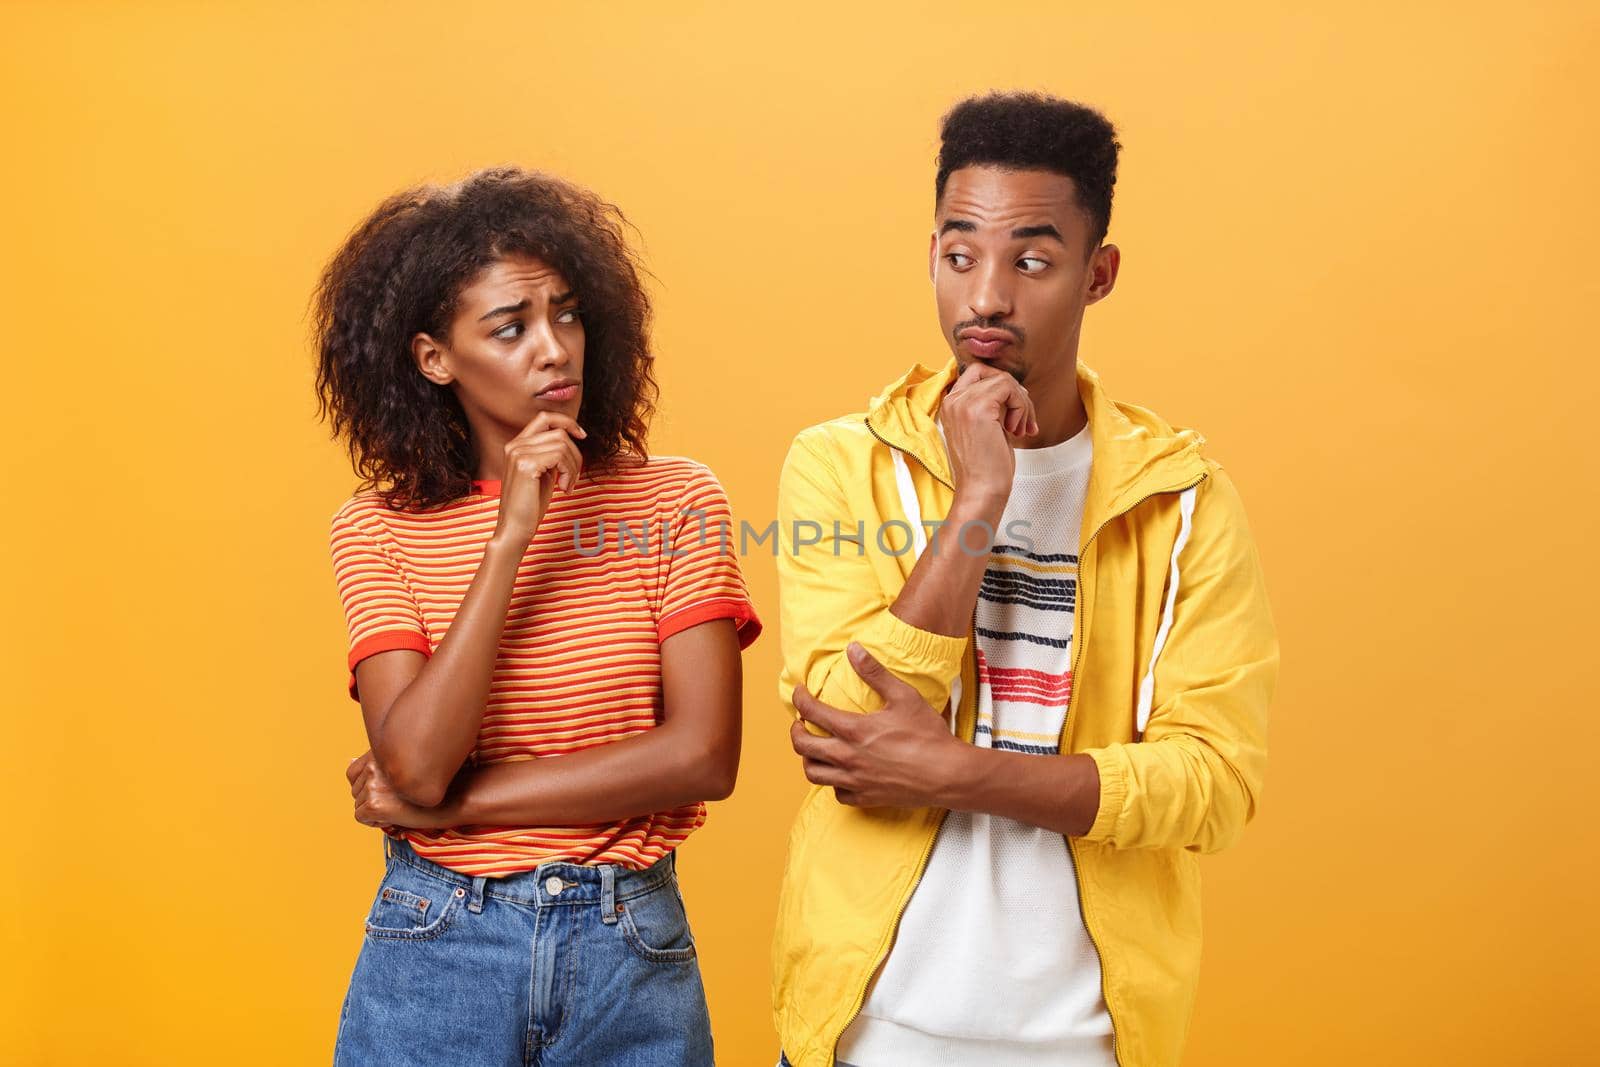 Silly confused girl standing gloomy and worried pursing lips and frowning holding hand on chin looking at boyfriend confused while guy glancing at girlfriend with curious expression over orange wall. Lifestyle.